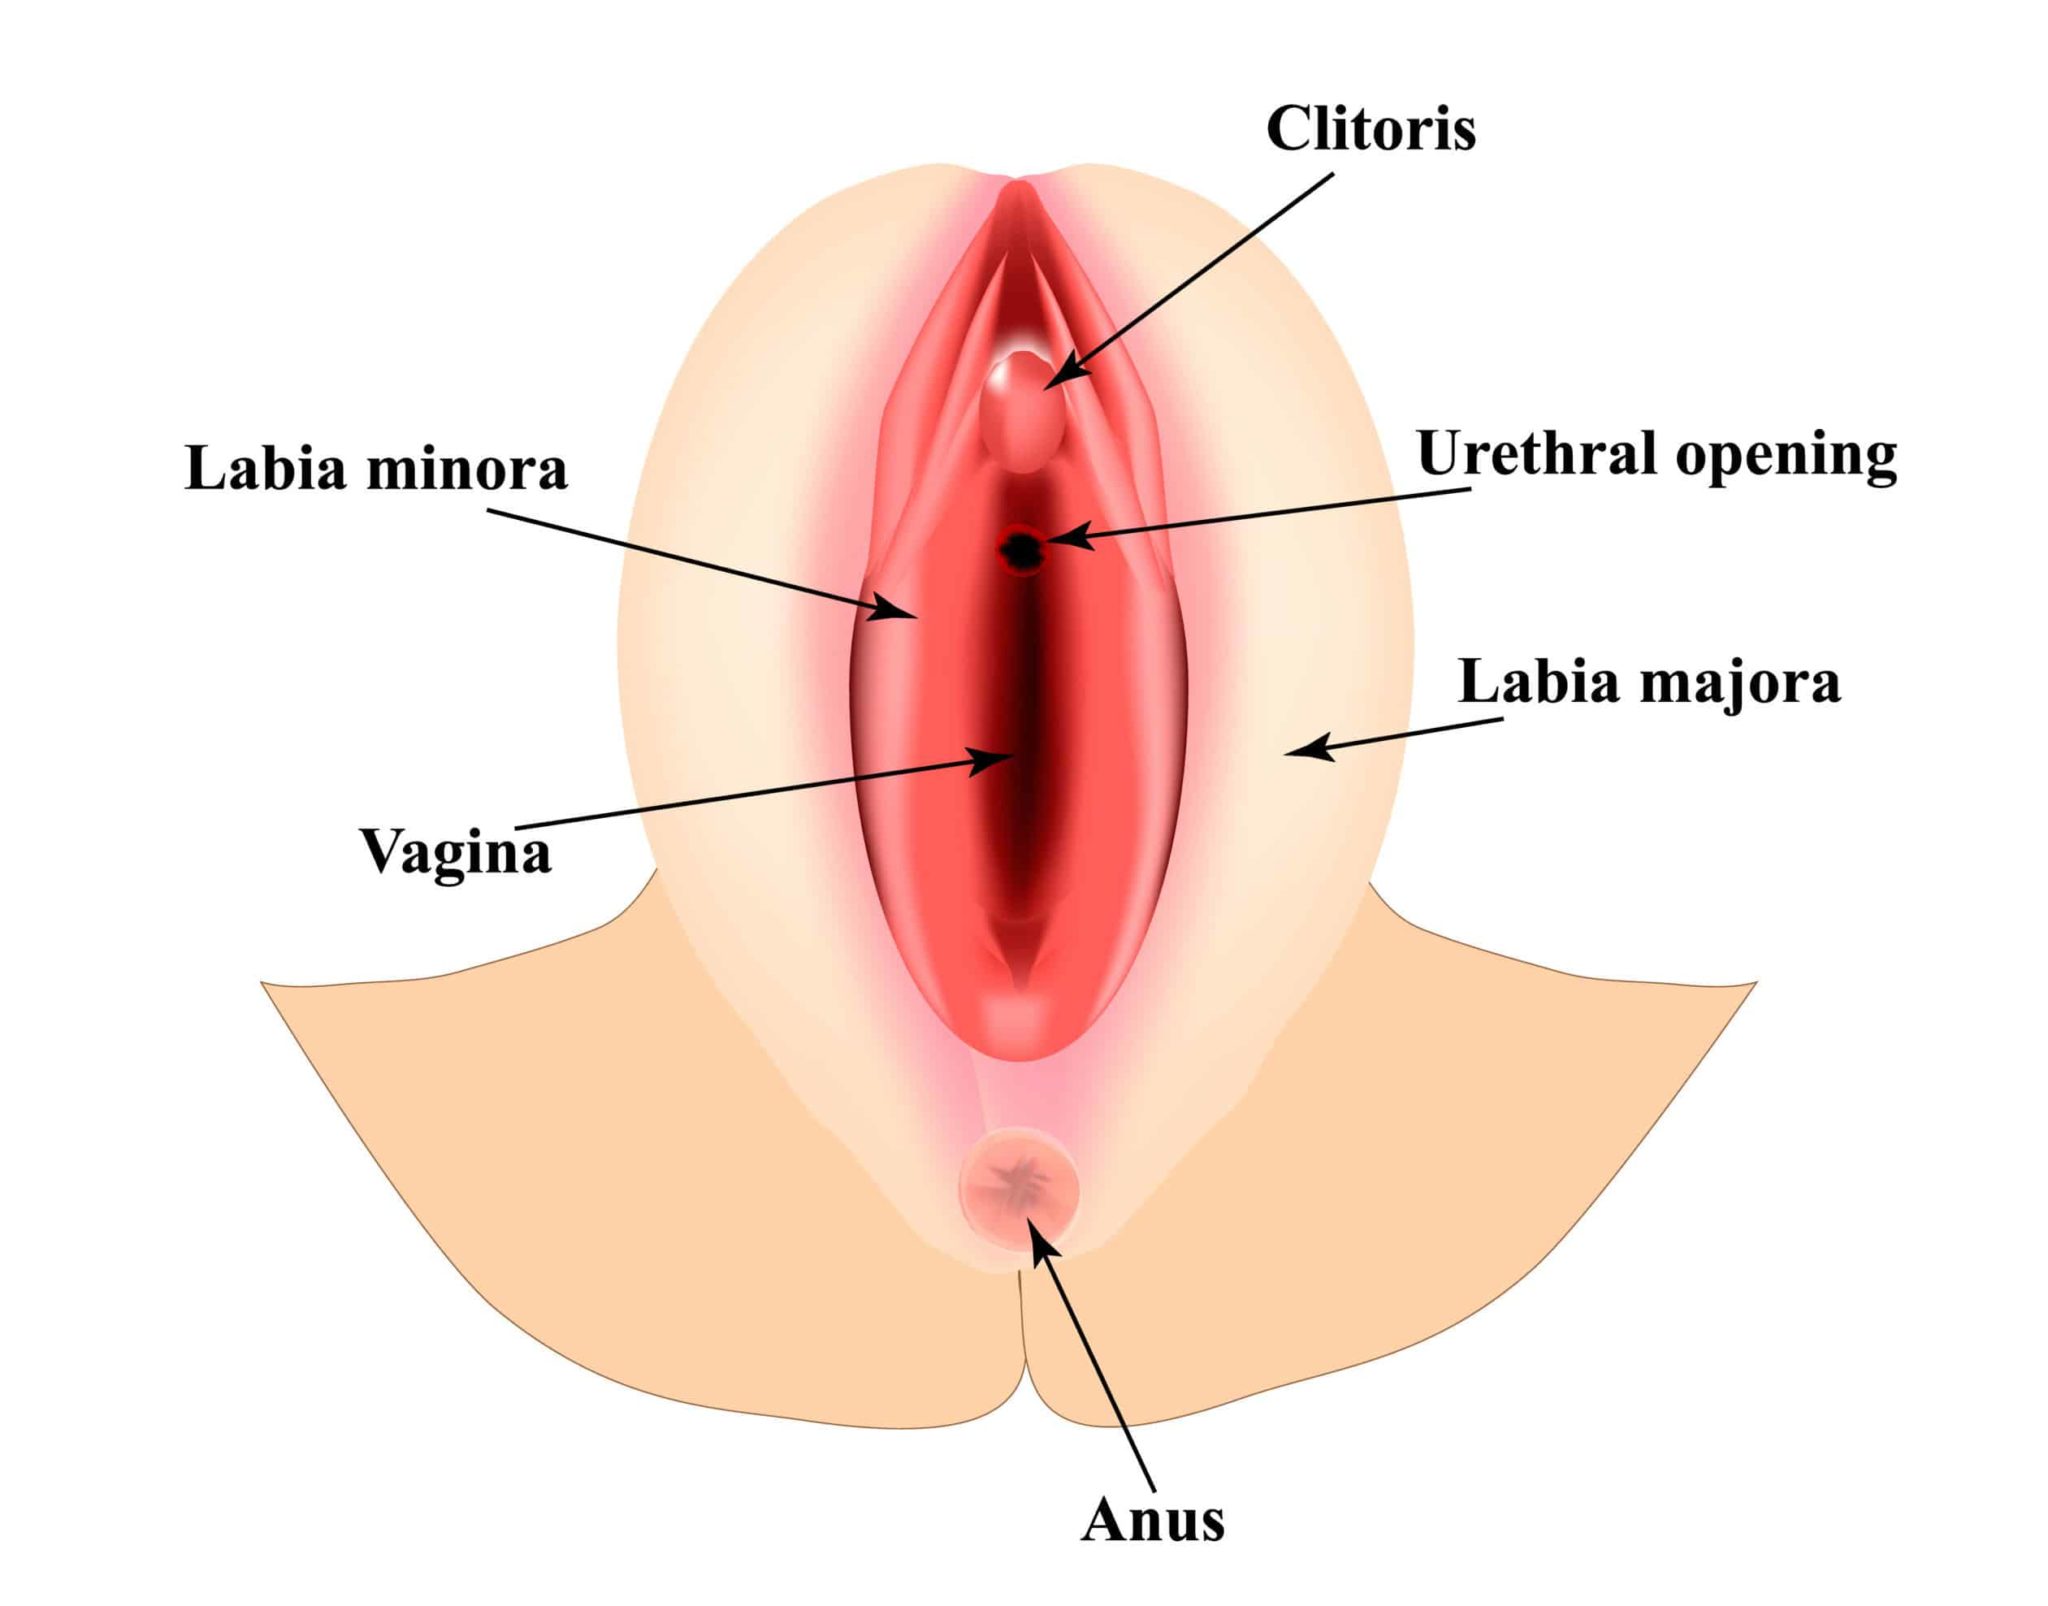 On outer labia lump Cyst or